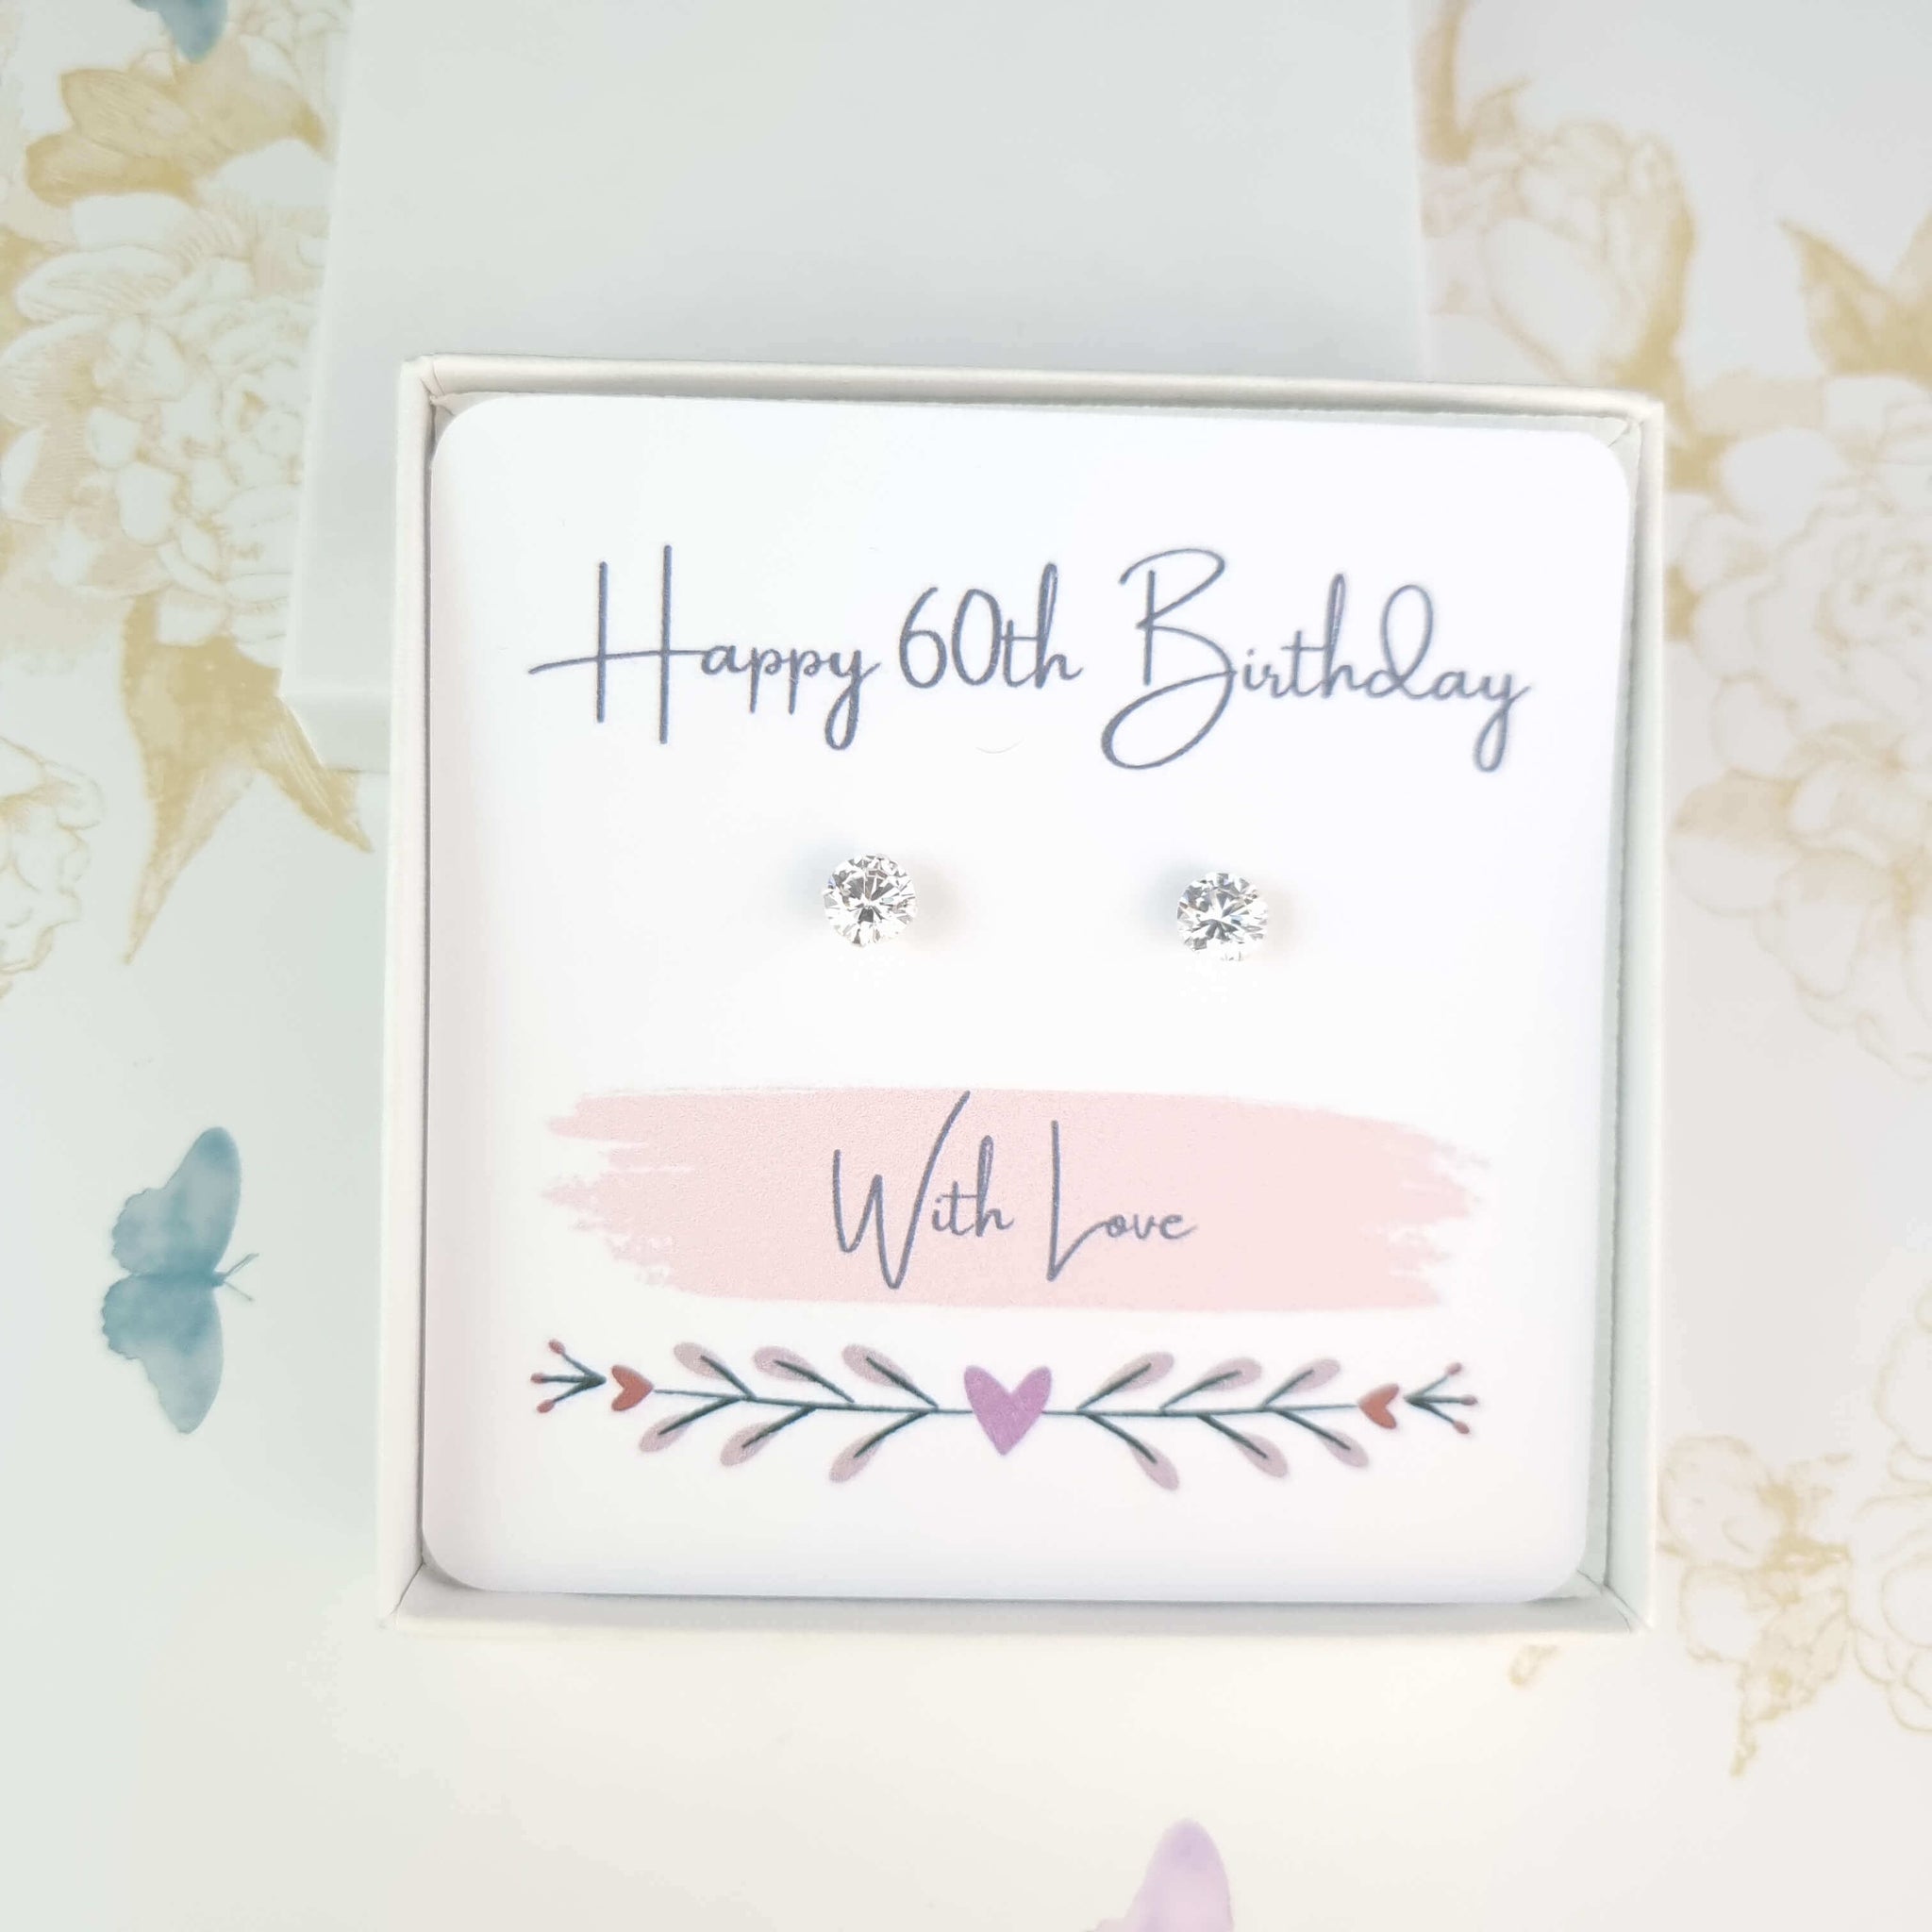 Sterling silver CZ stud earrings with gift box for a 60th birthday